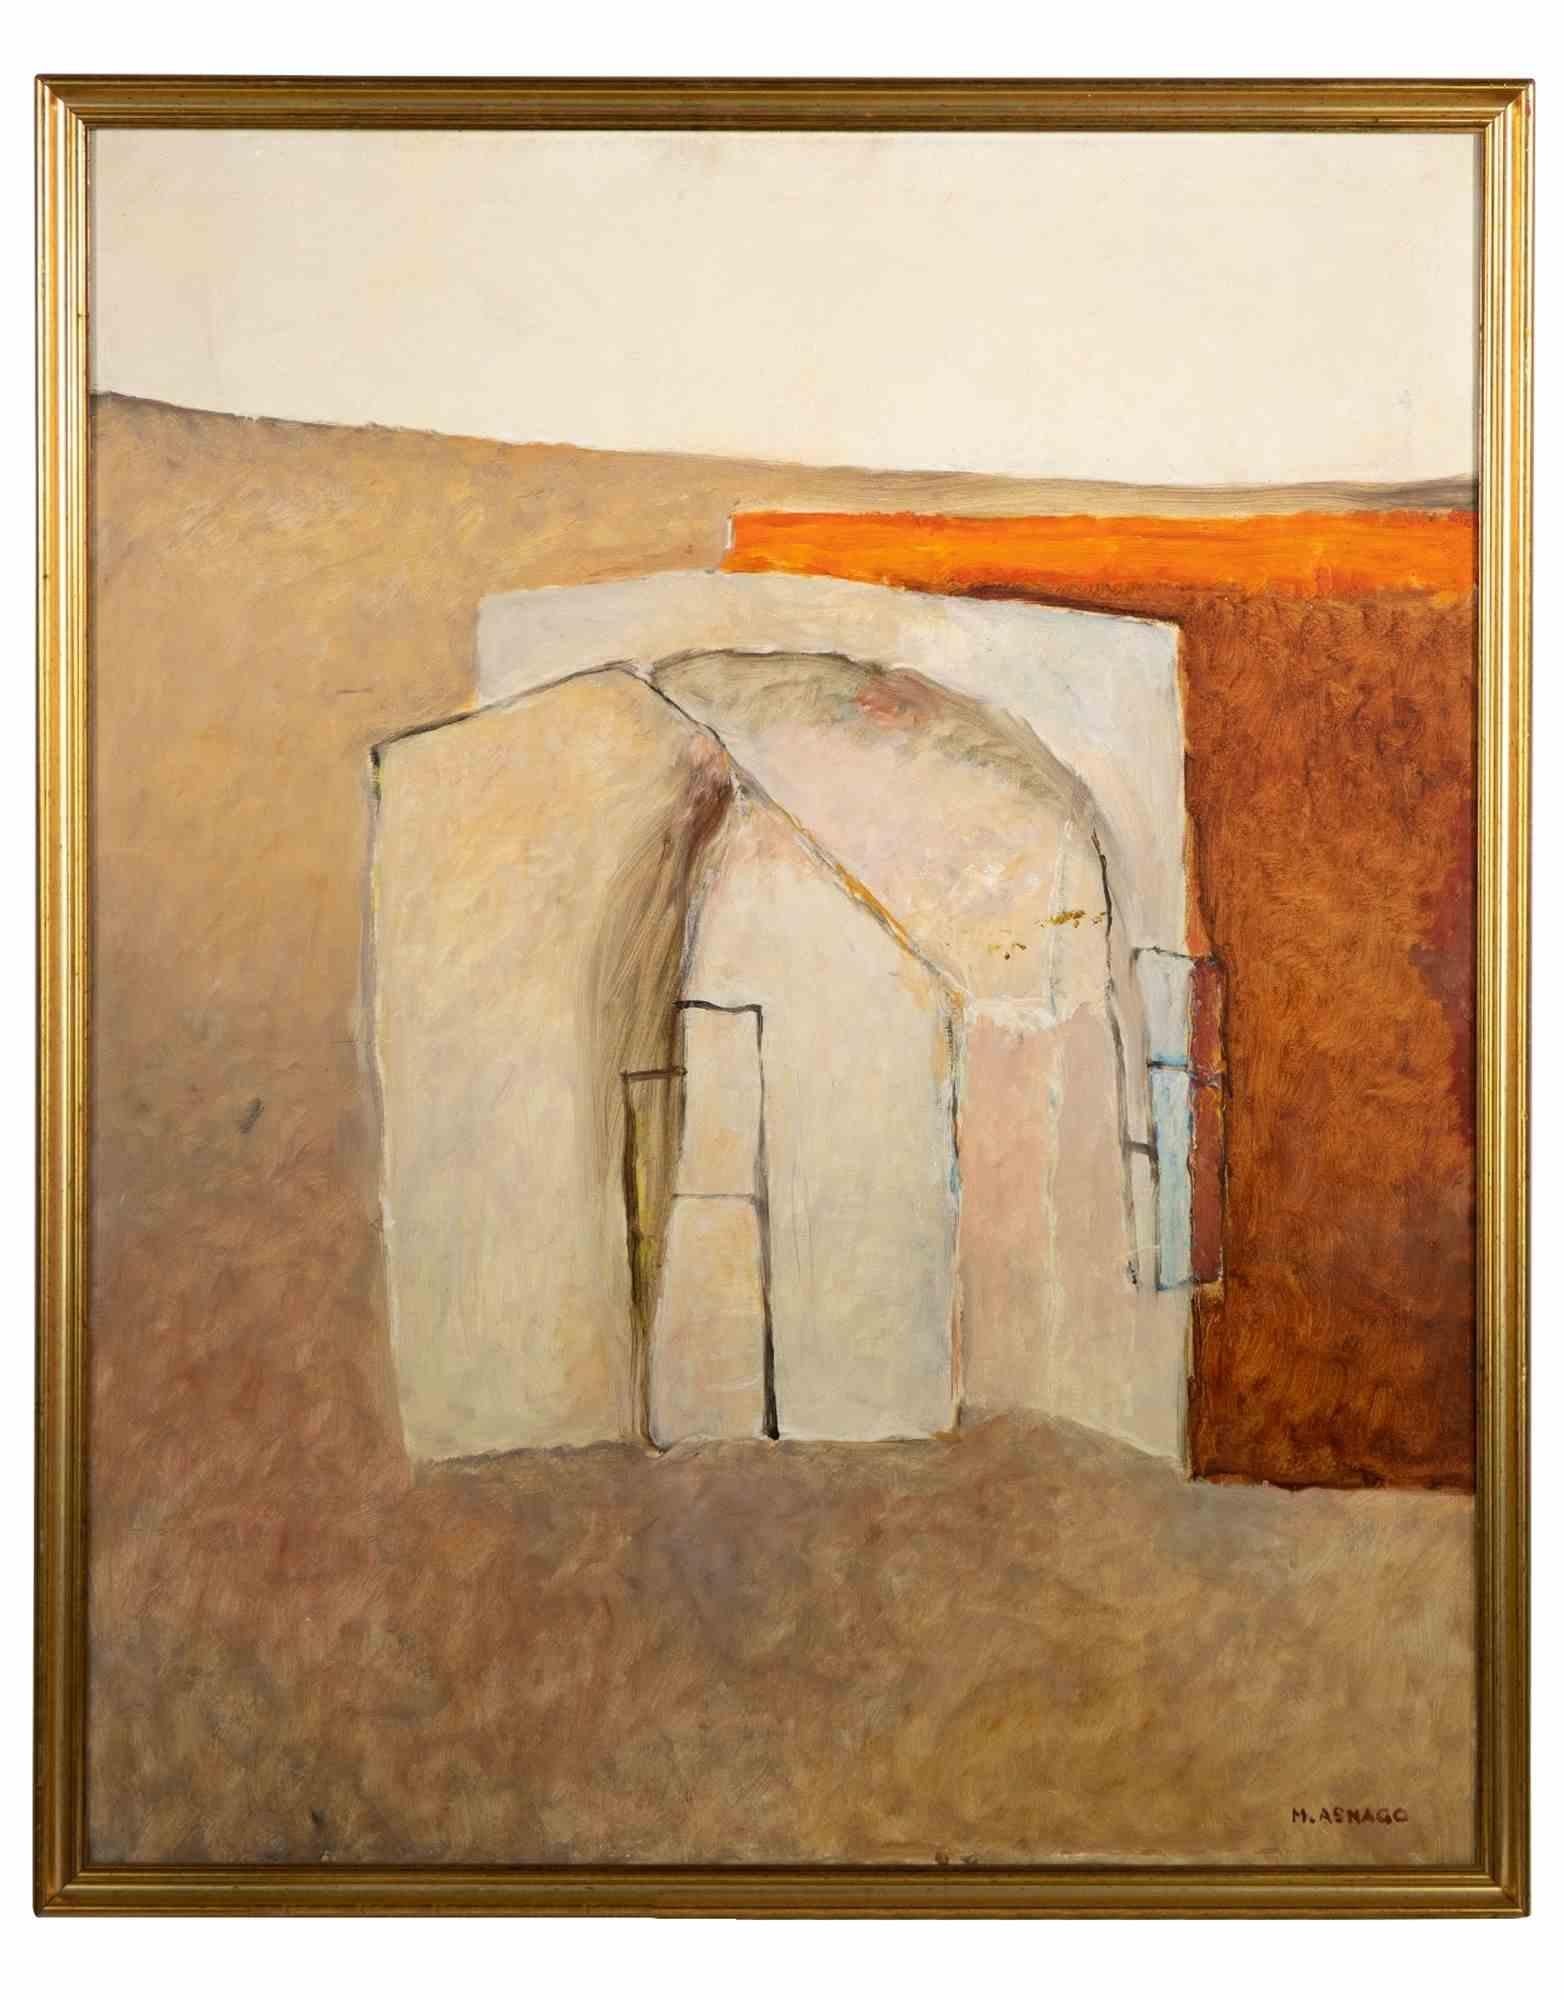 Home in the desert  is an artwork realized by Mario Asnago (Barlassina, 25 March 1896 – Monza, 28 January 1981). 

Oil paiting on canvas.

107 x 85 cm; framed.

Hand signed in the lower right margin.

Good conditions!



Mario Asnago (born March 25,